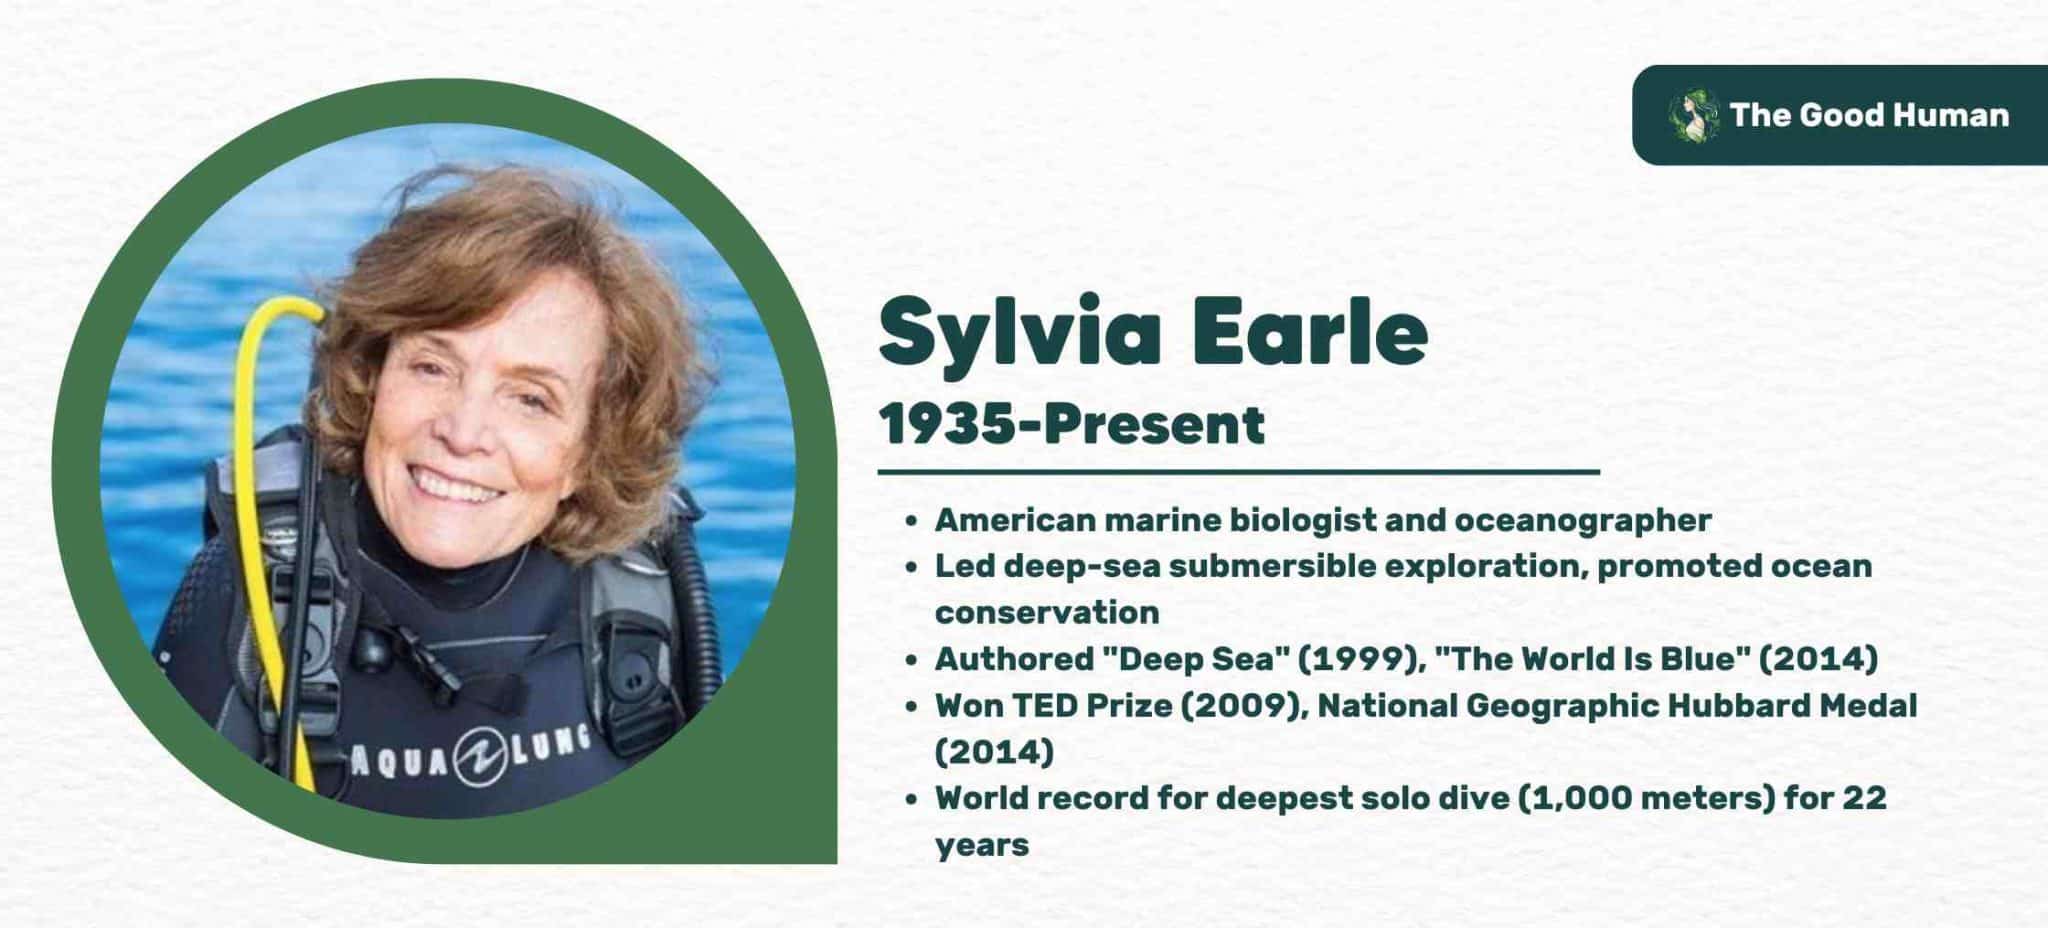 About Sylvia Earle